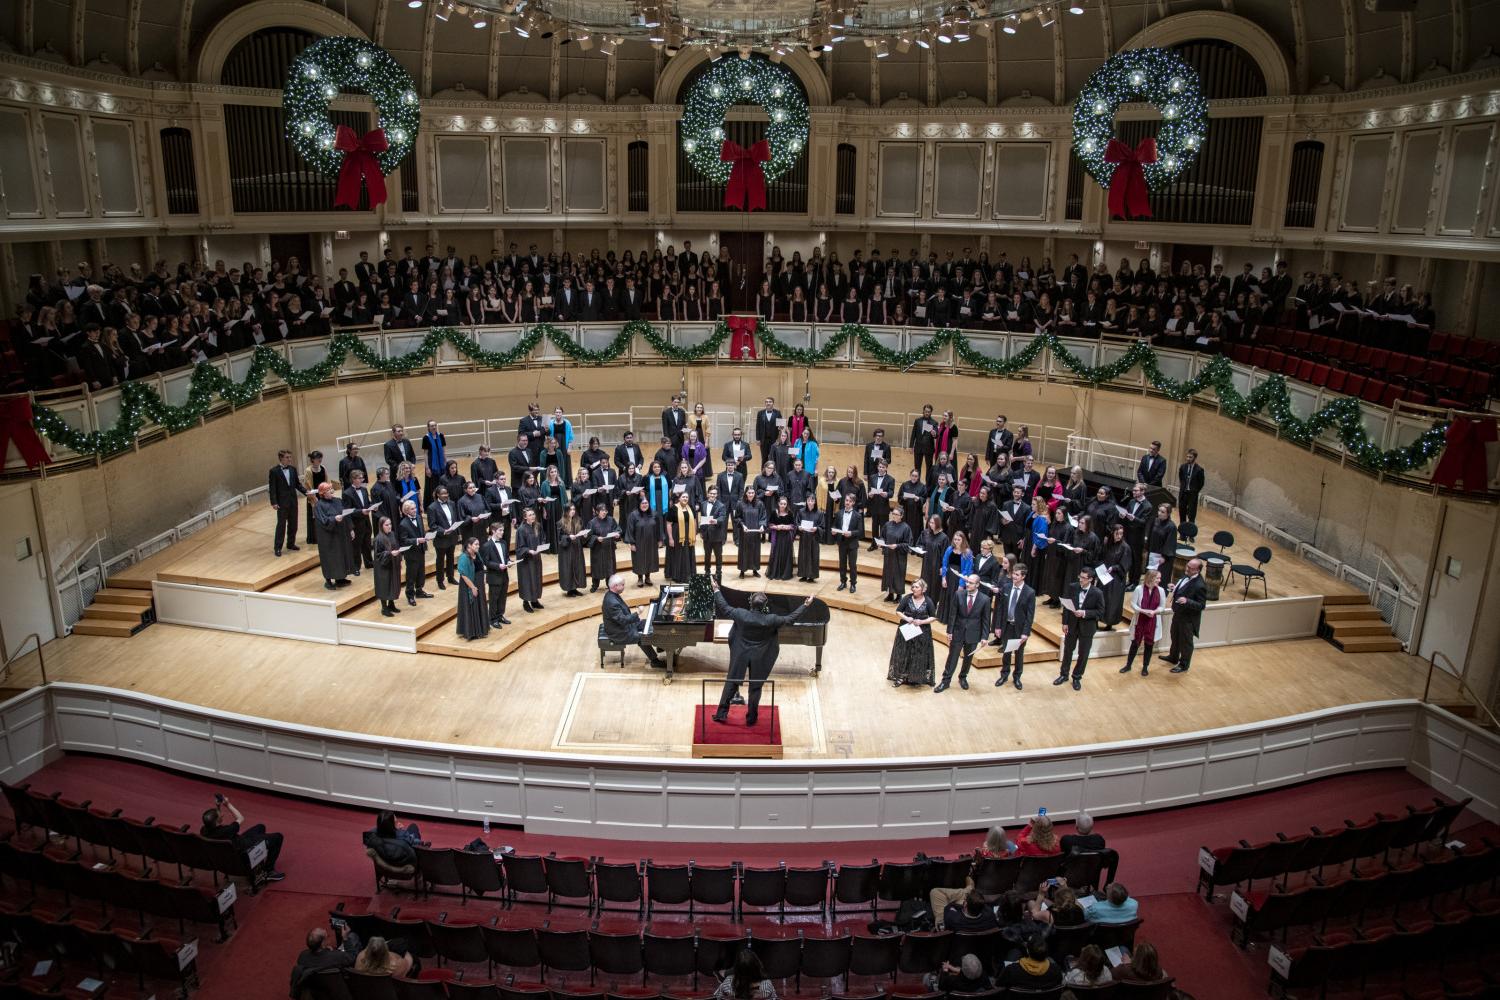 The <a href='http://9942.daves-studio.com'>bv伟德ios下载</a> Choir performs in the Chicago Symphony Hall.